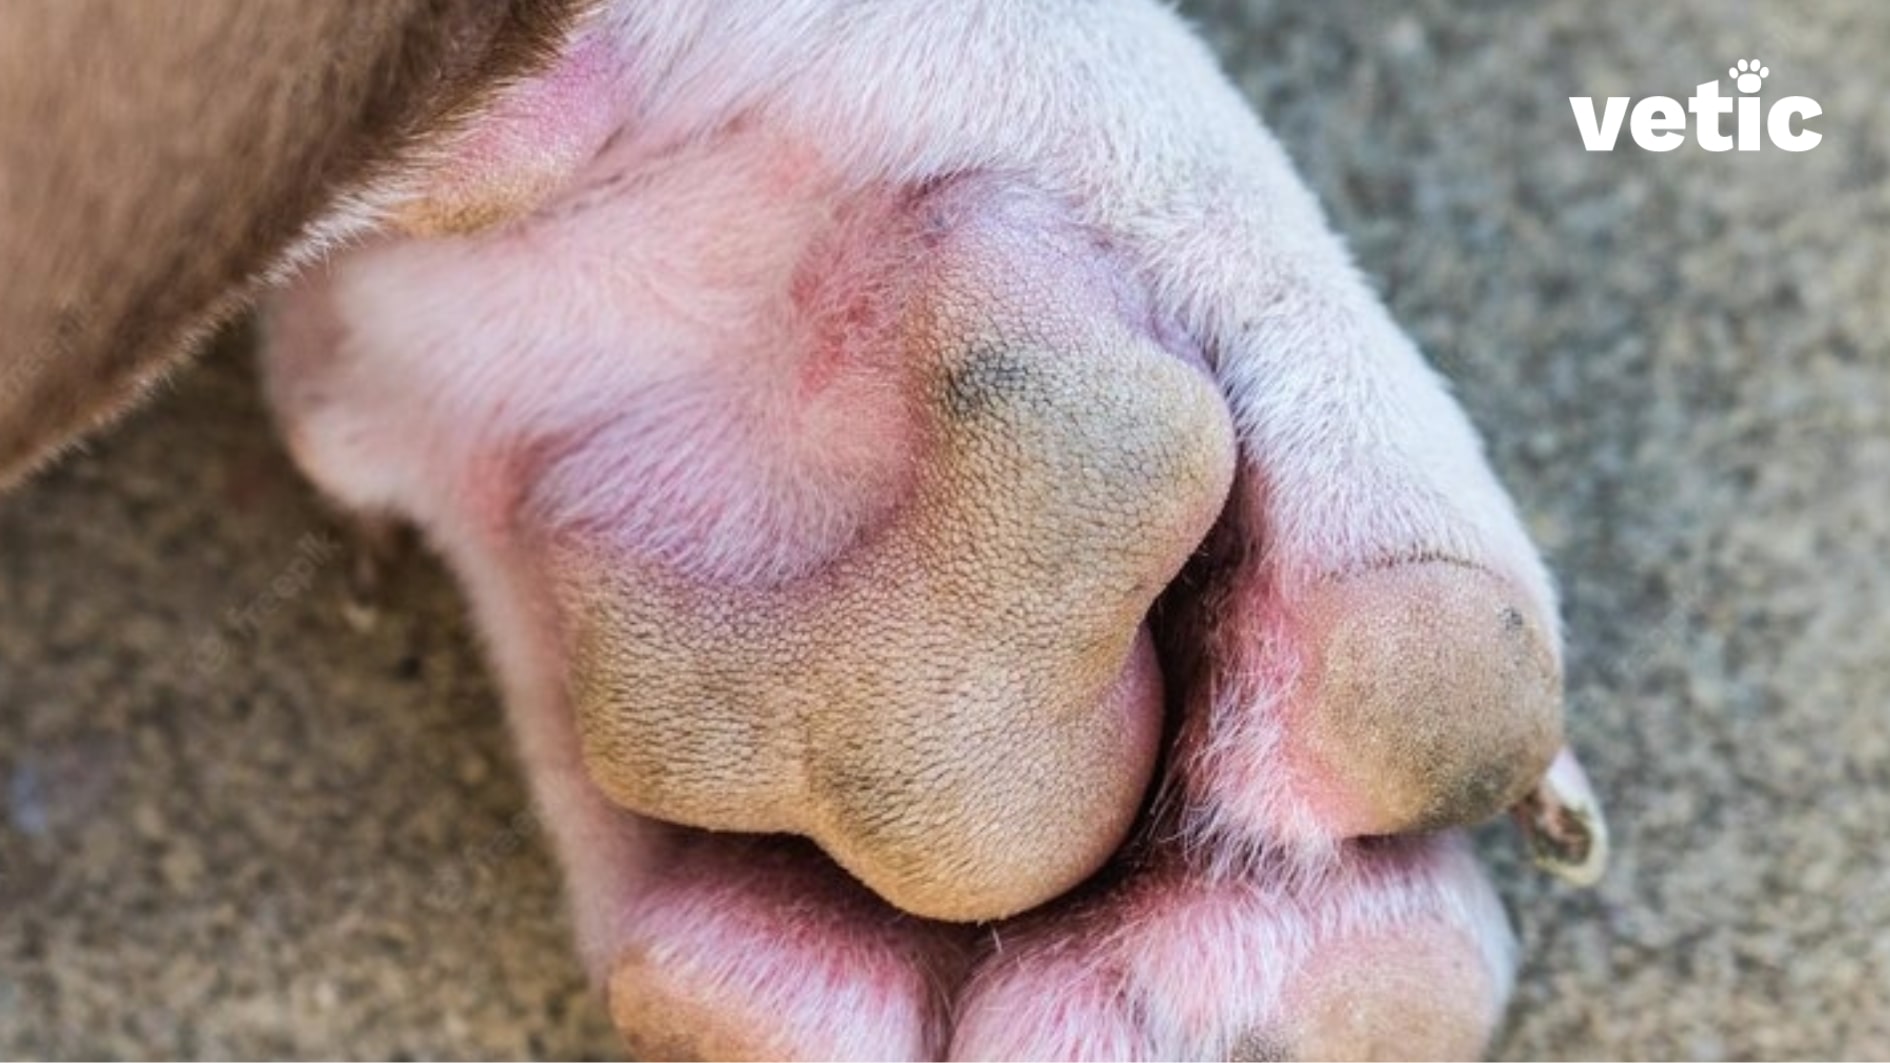 The underside of a dog's paw exhibiting excessive redness and some swelling. These can cause excessive foot licking and other signs of pododermatitis in dogs.